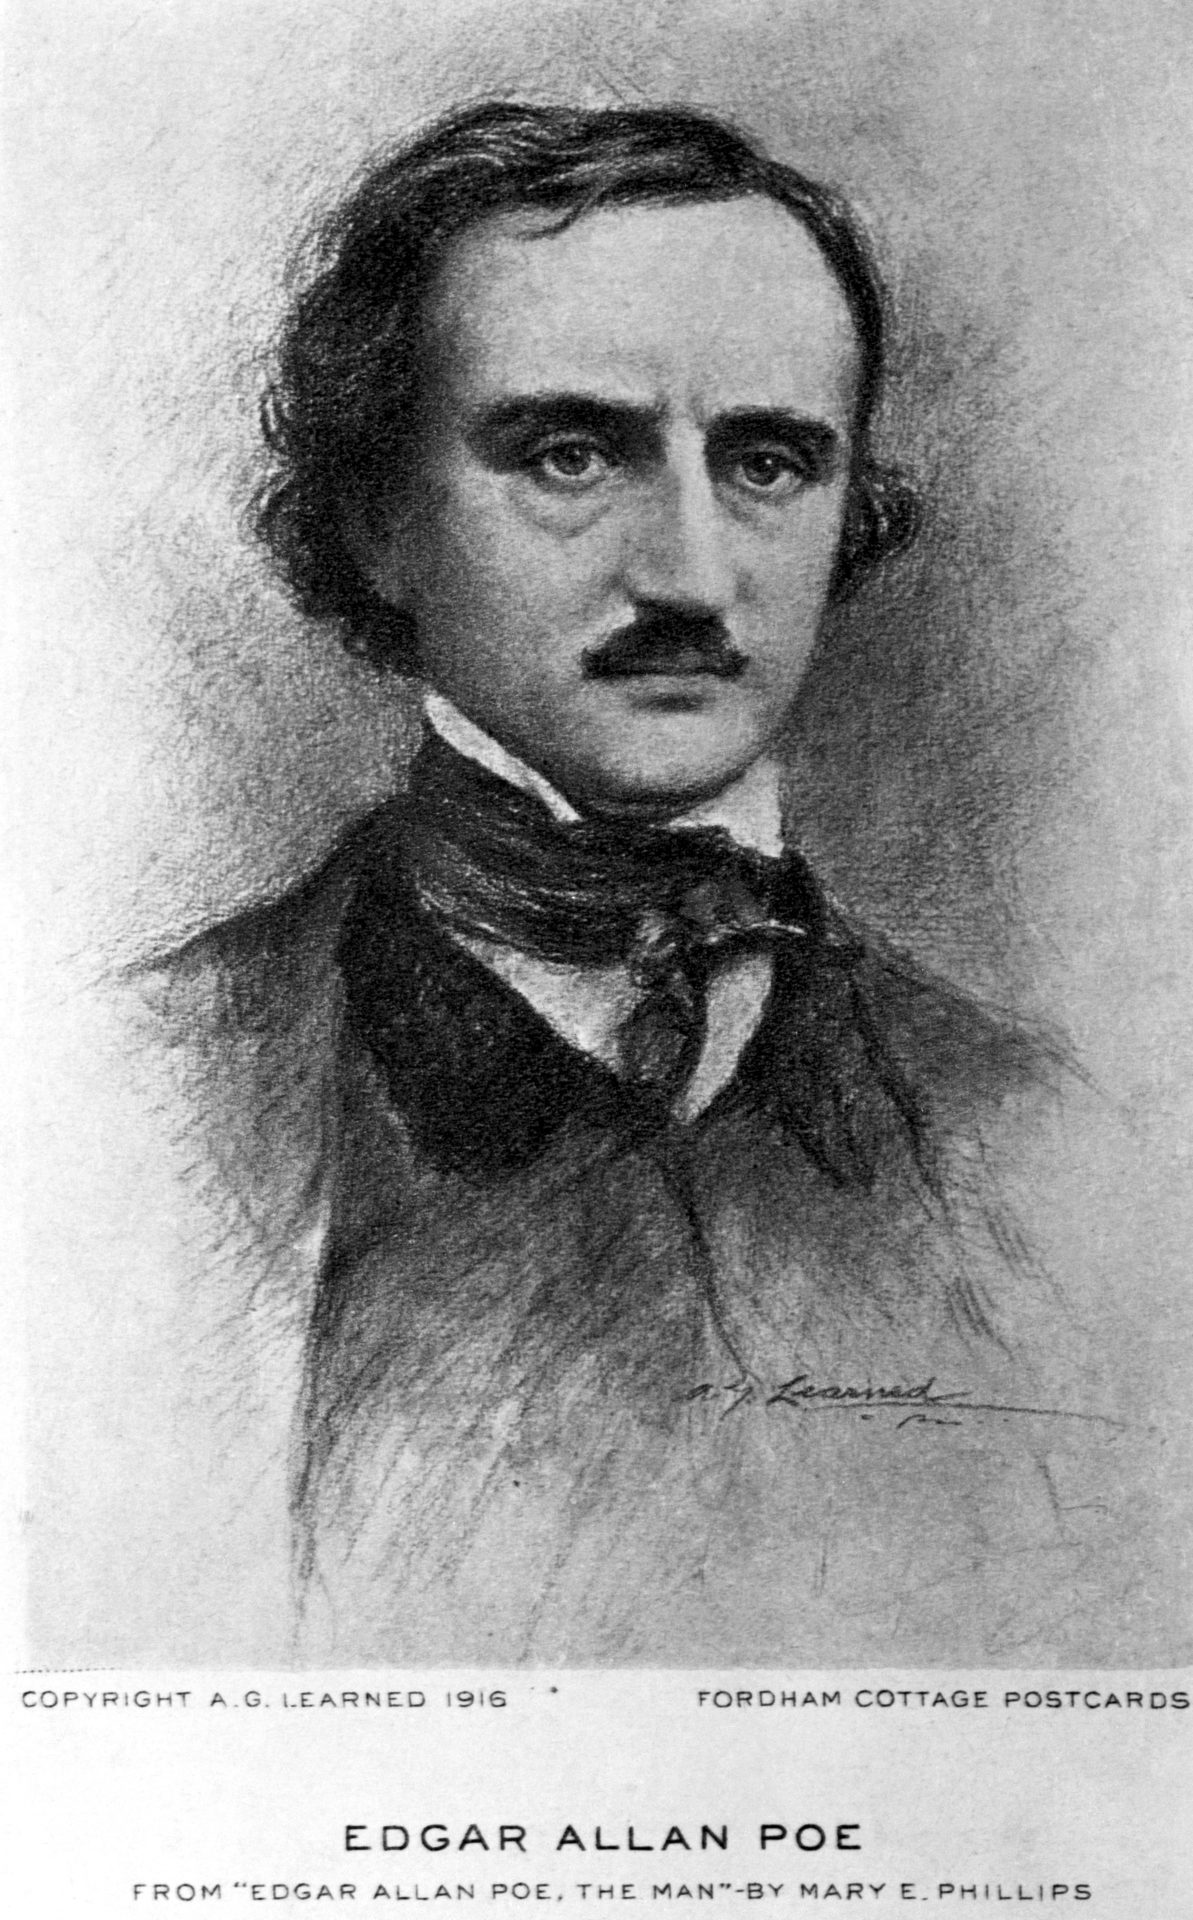 Print After Edgar Allan Poe by A.G. Learned